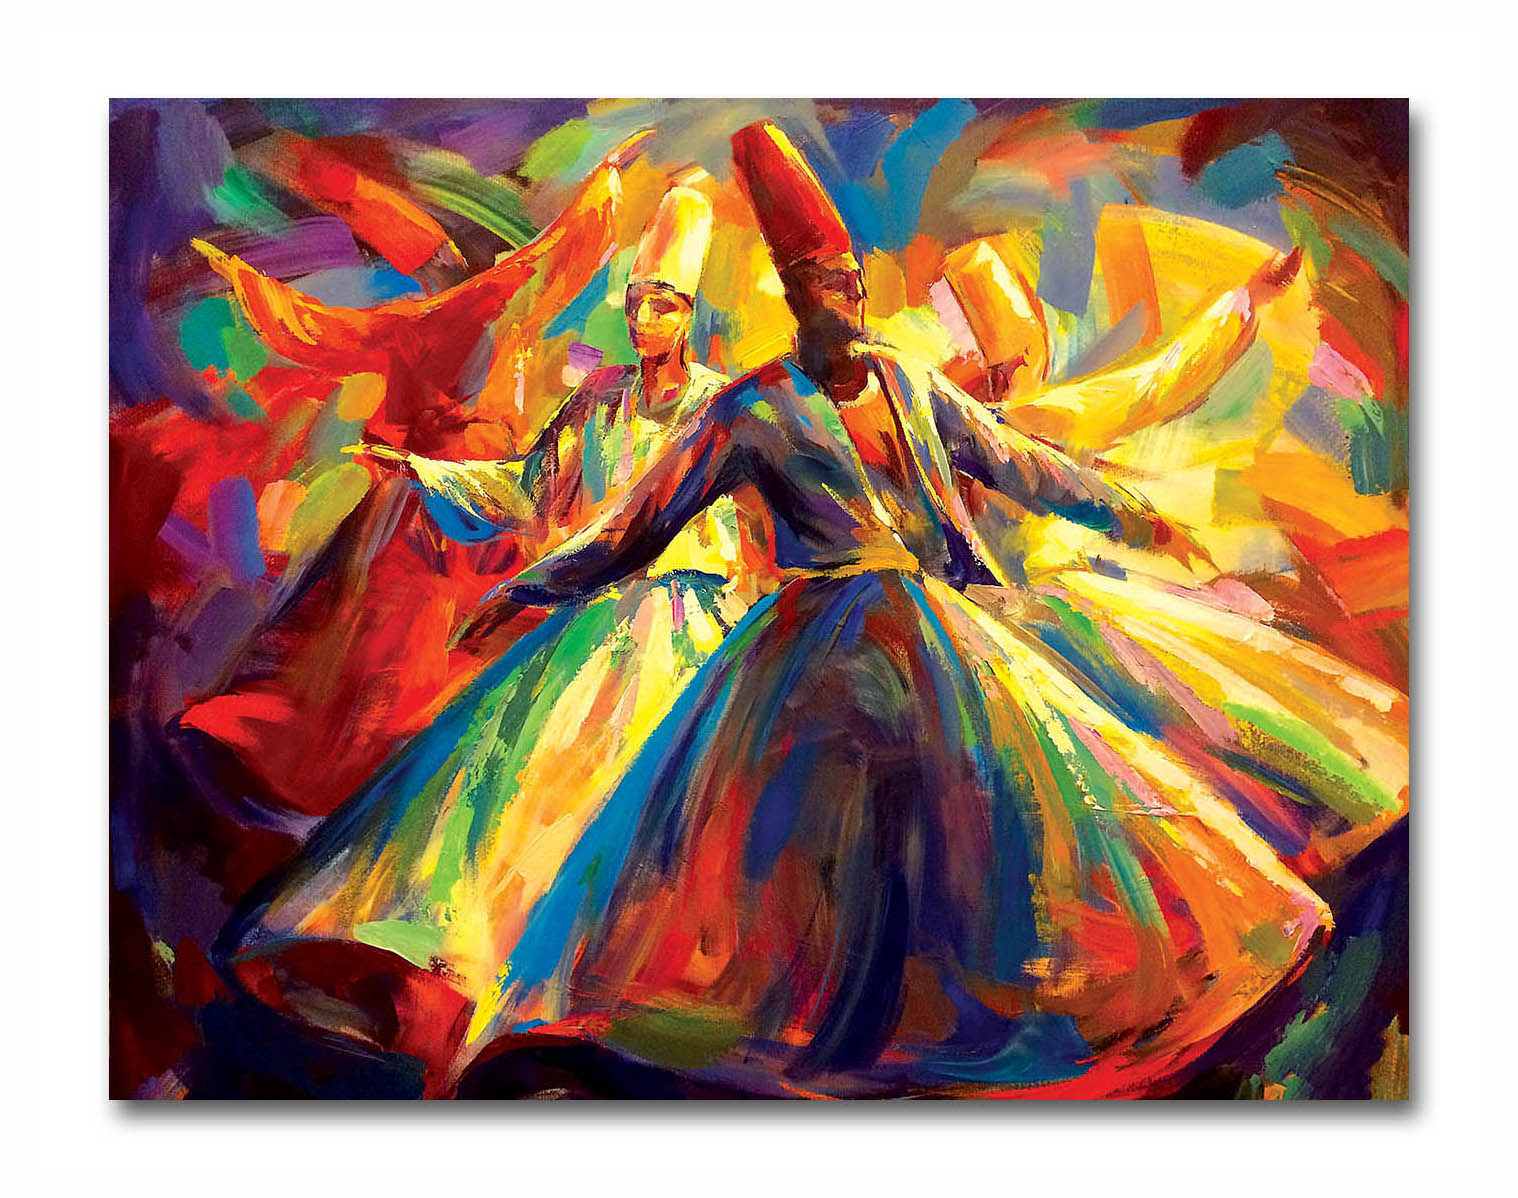 Worship of Allah - Unframed Canvas Painting